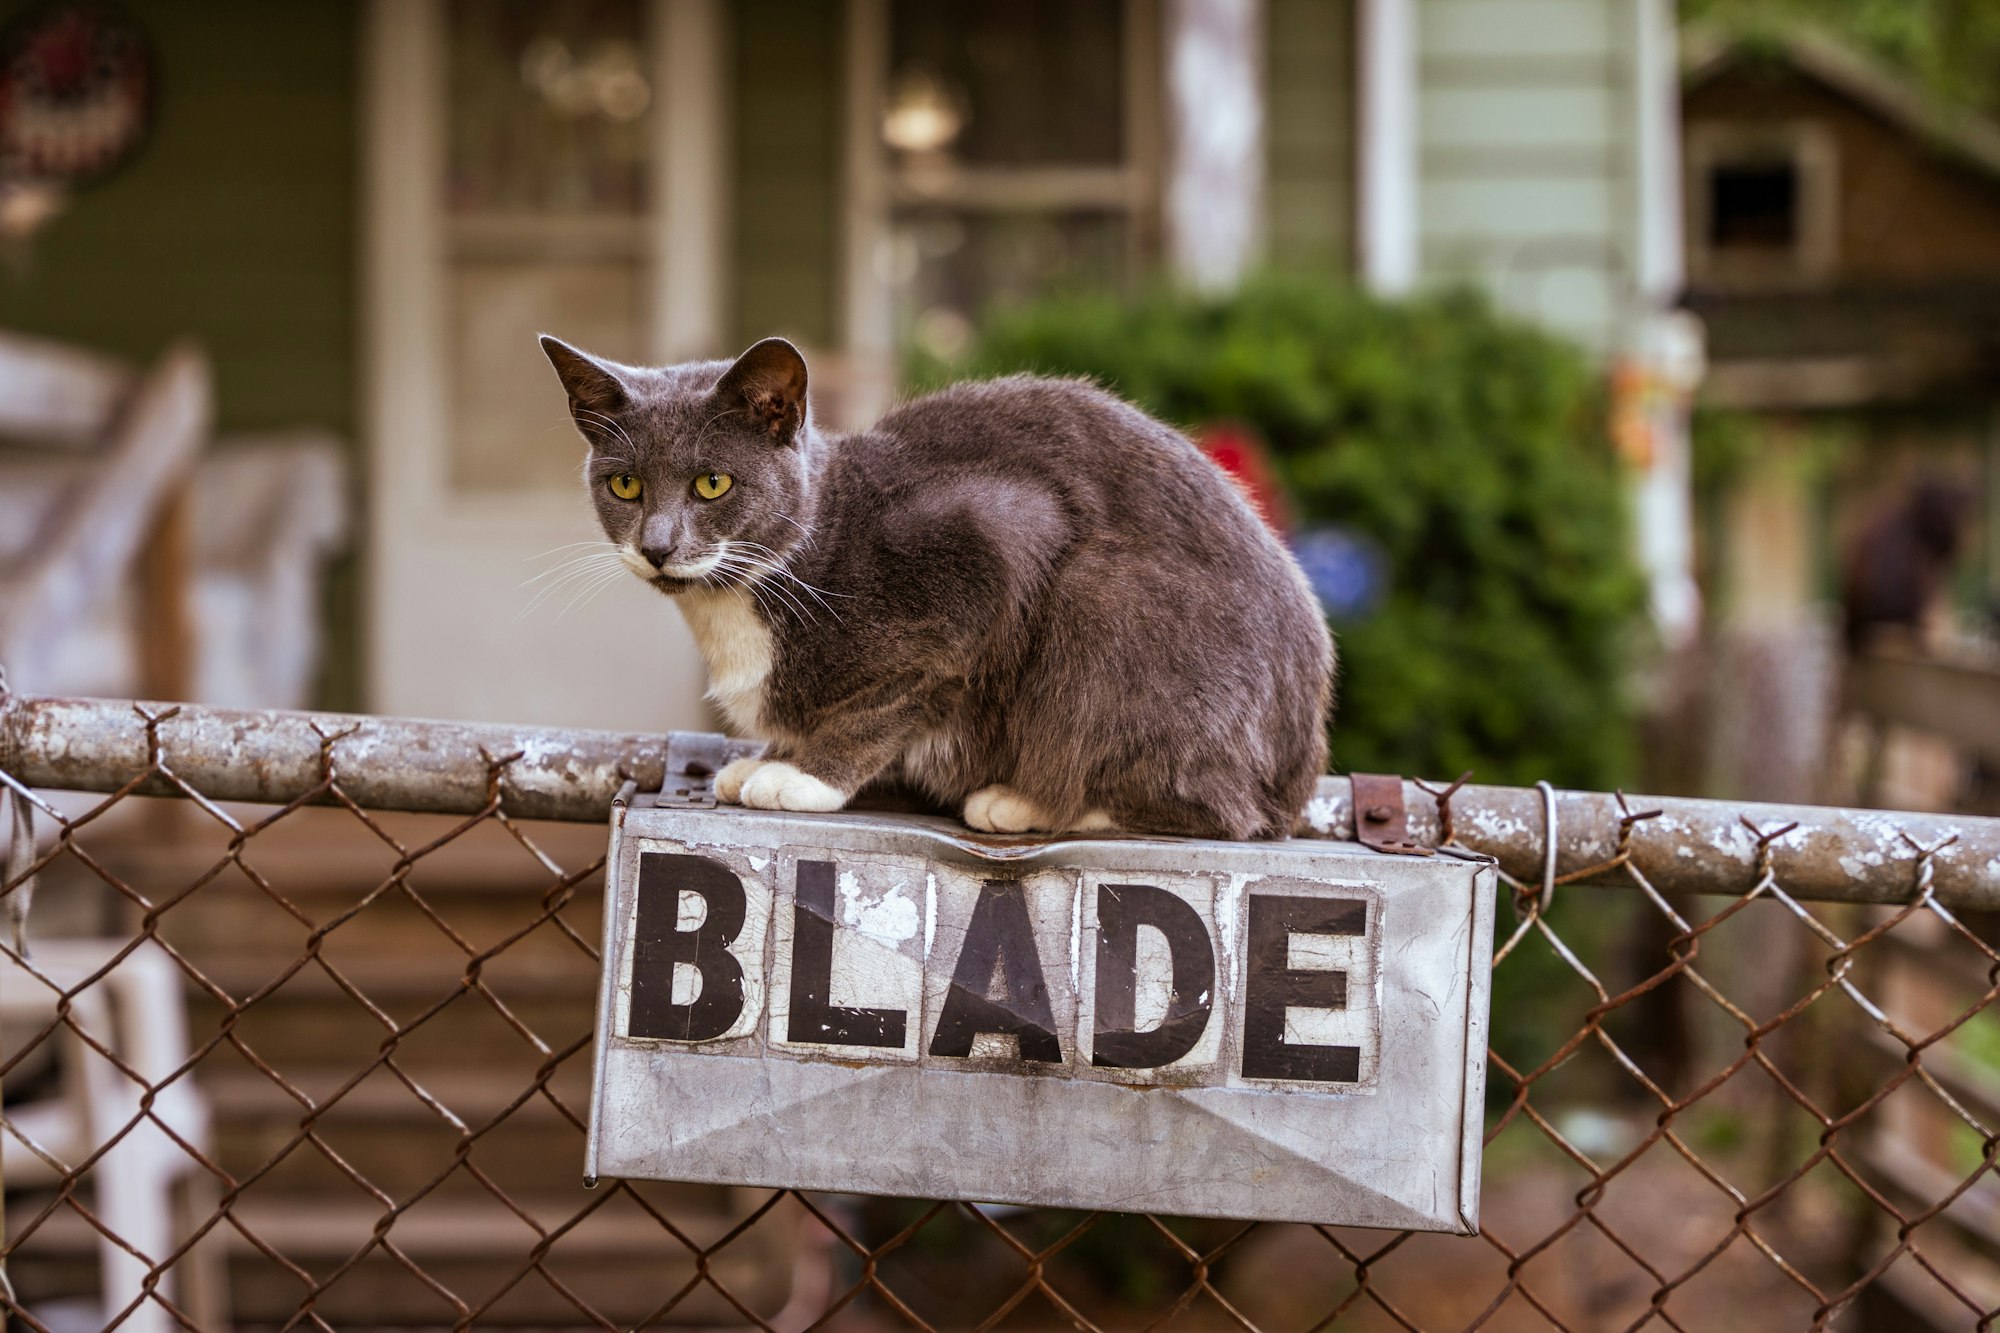 Grey cat sitting on a chain link fence above a sign that says "BLADE"